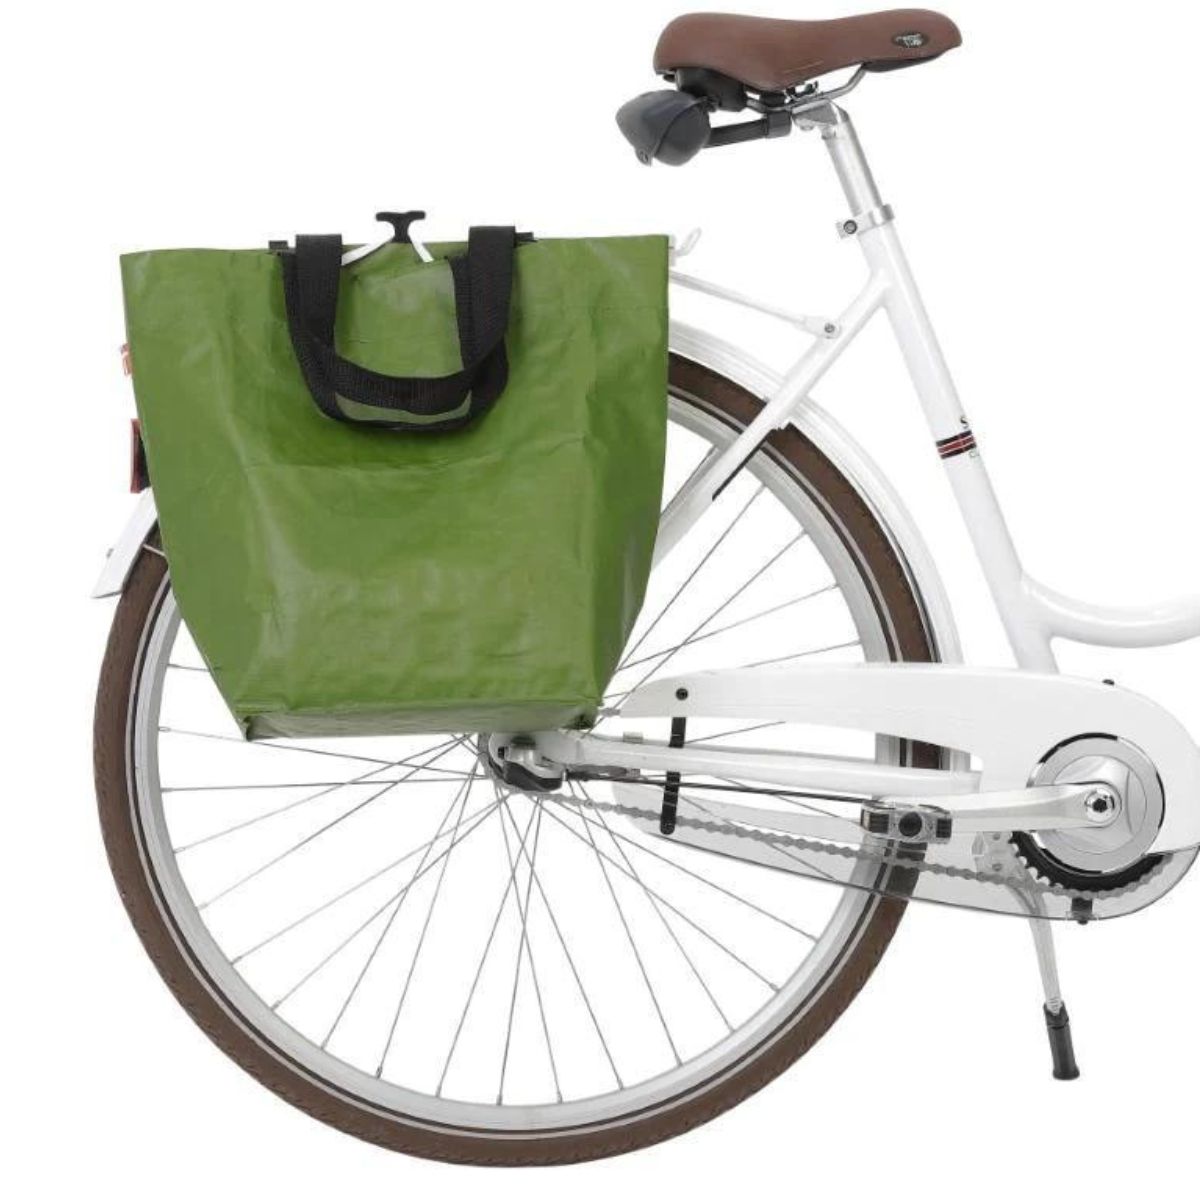 Cycle Shopper bag In Use.